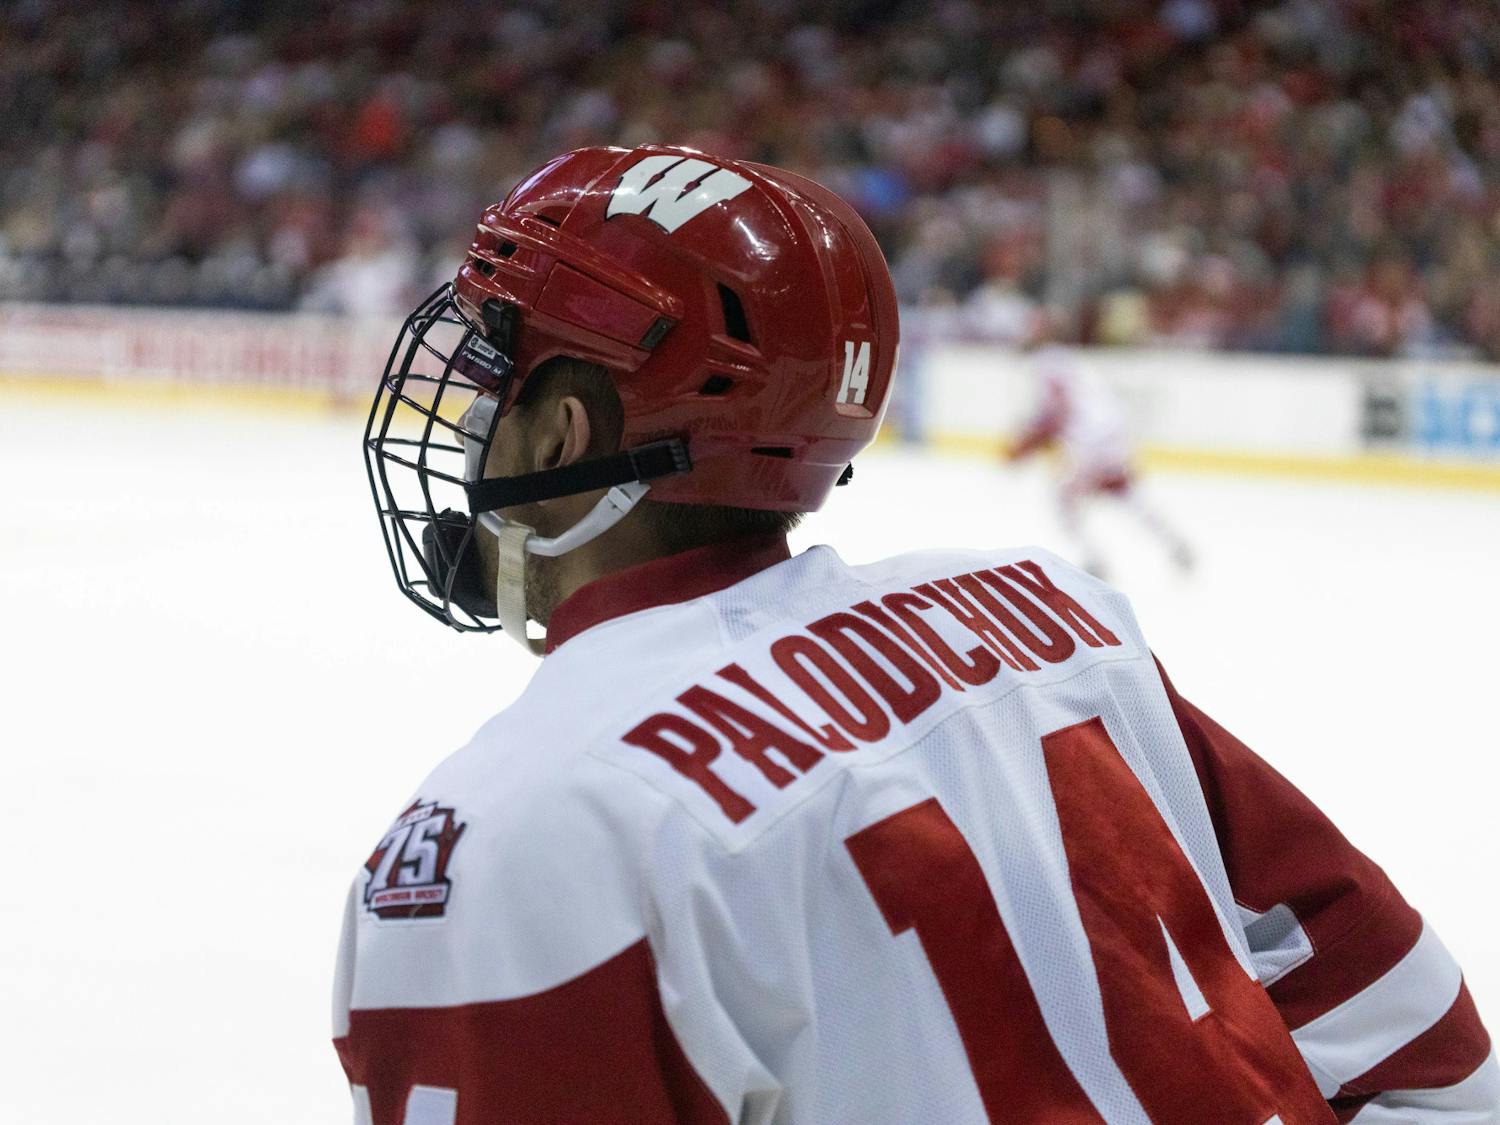 PHOTOS: Badgers Men's Hockey dominate the weekend over Penn State in second day 4-1 win